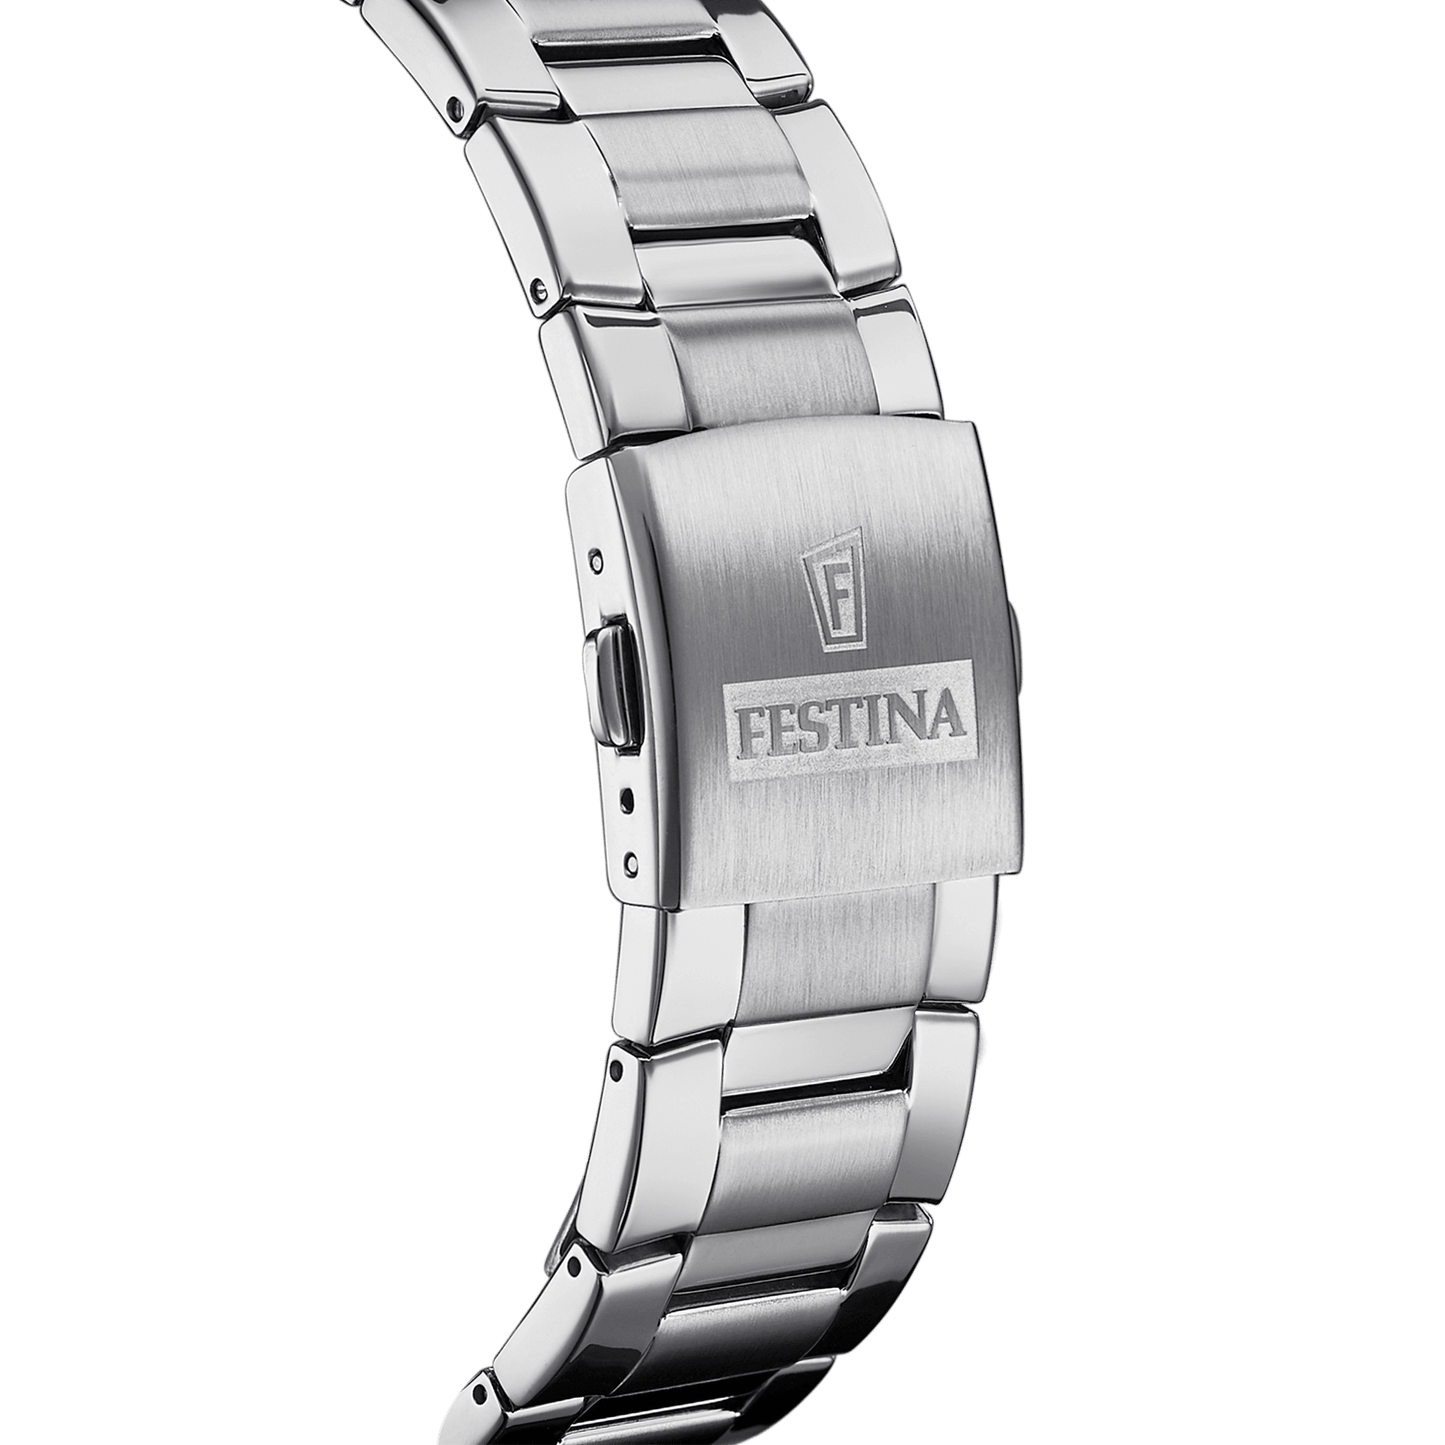 Chrono Sport F20463-2 | Water Resistance 100m/330ft - Strap Material Stainless Steel - Size 46 mm / Free shipping, 2 years warranty & 30 Days Return | Festina Watches USA